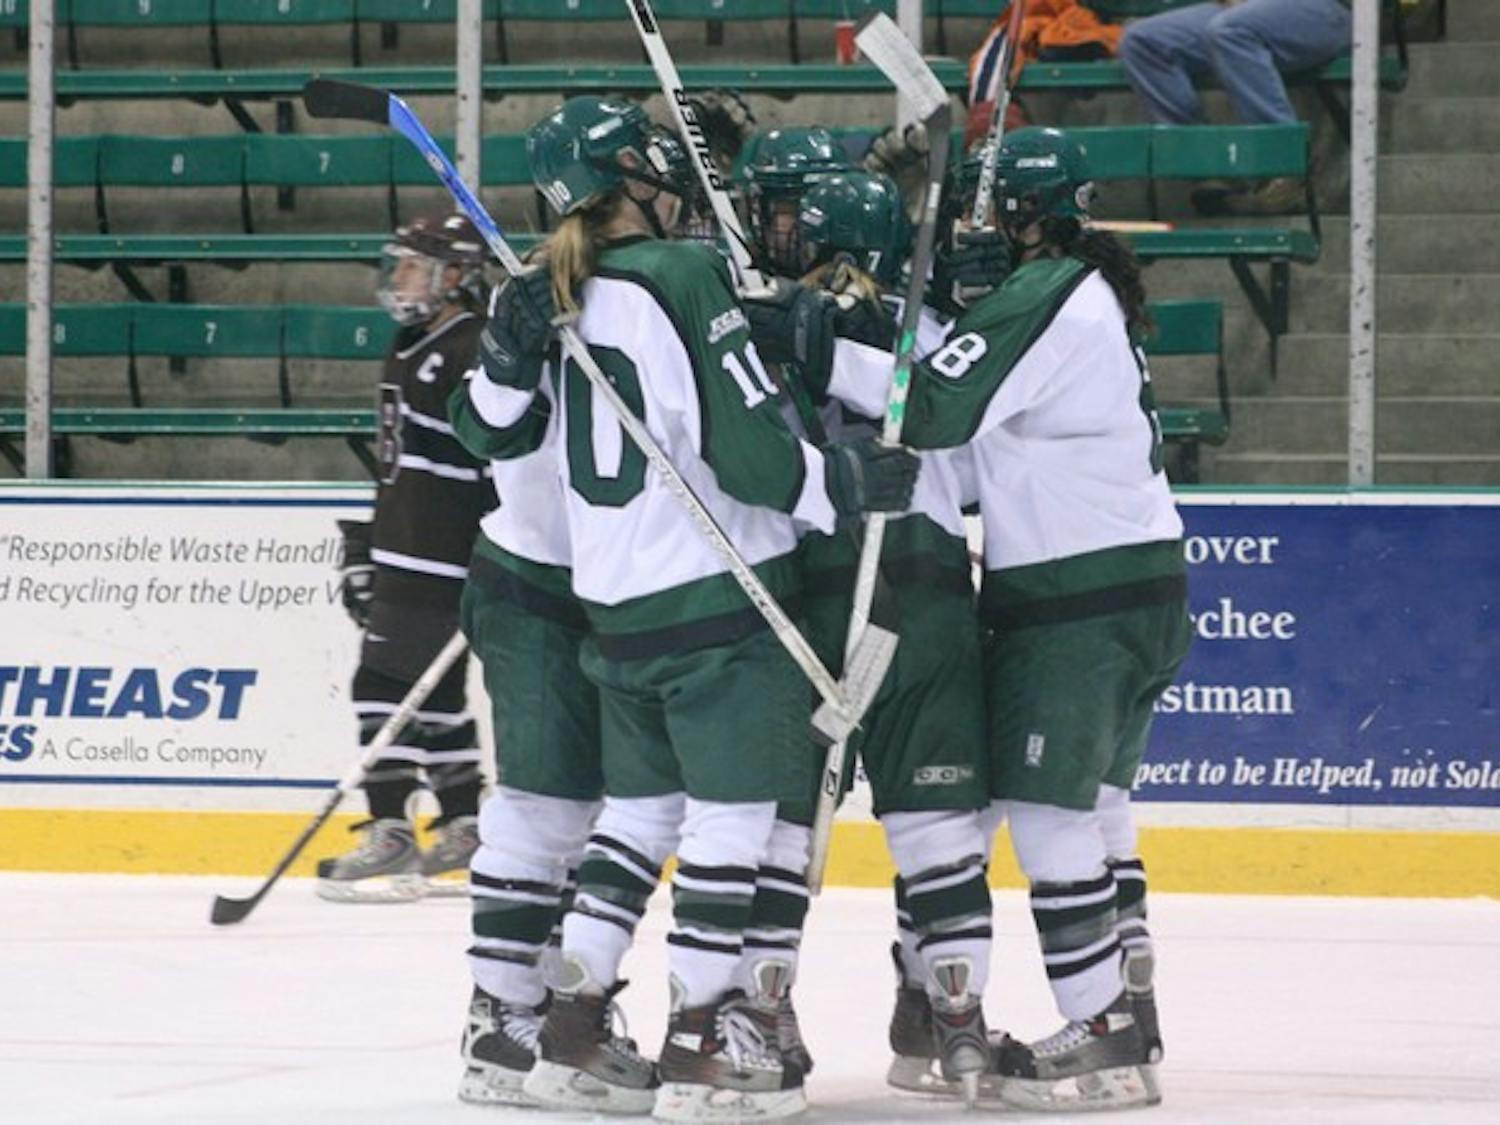 Dartmouth sports teams use the summer term to hone their skills for fall, winter and spring seasons.